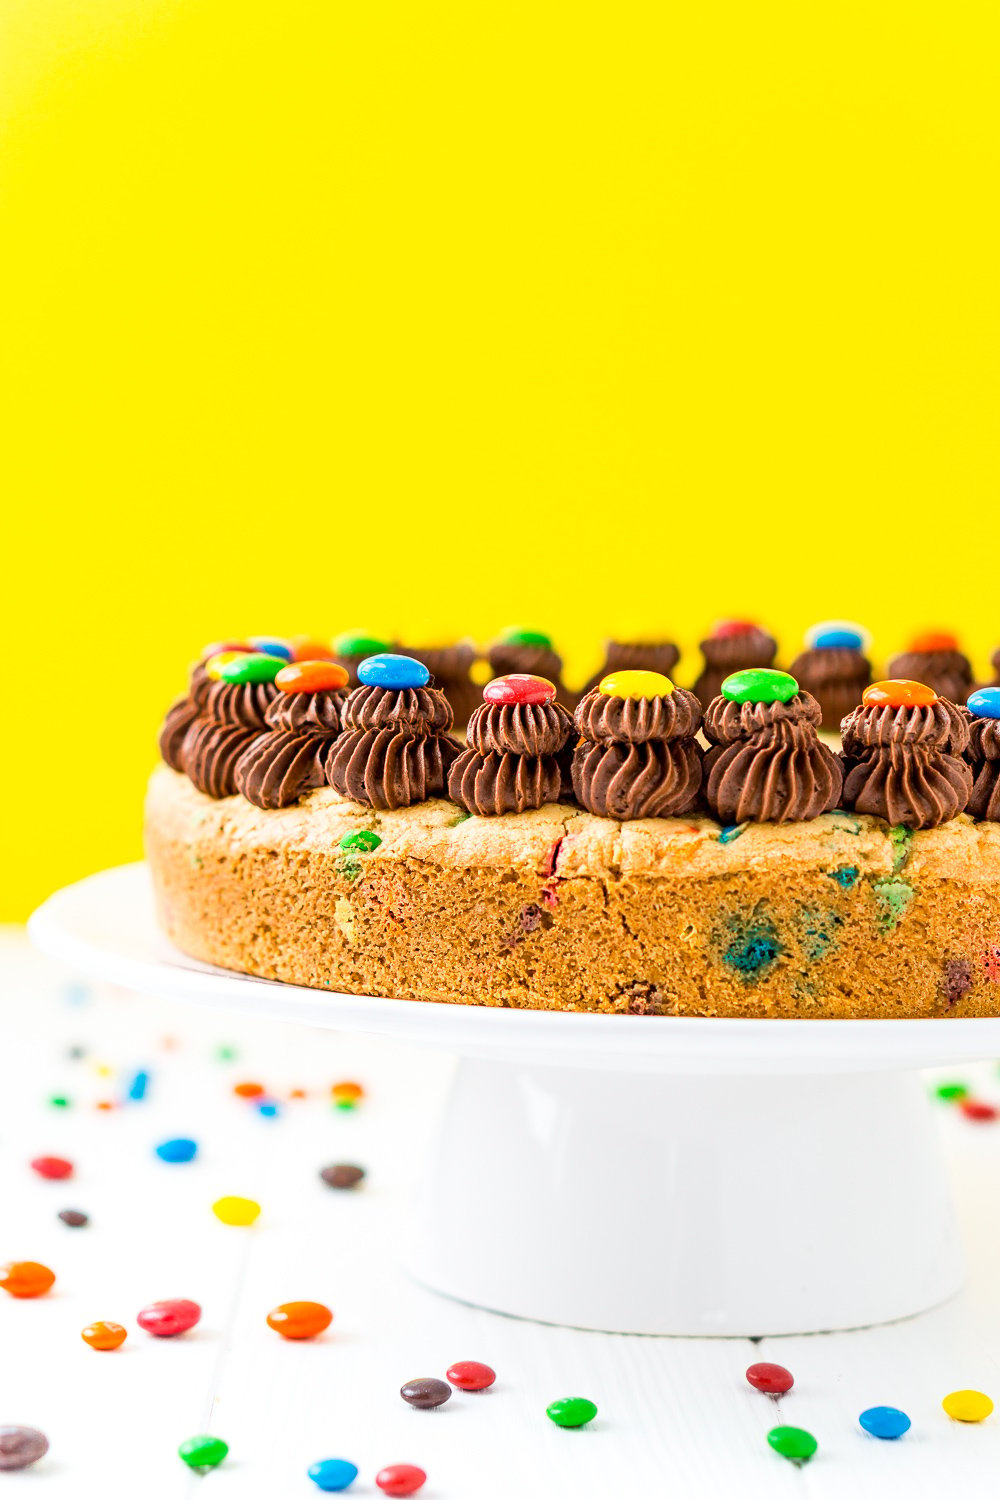 M&M's Cookie Cake with chocolate frosting on a white cake stand with yellow background.